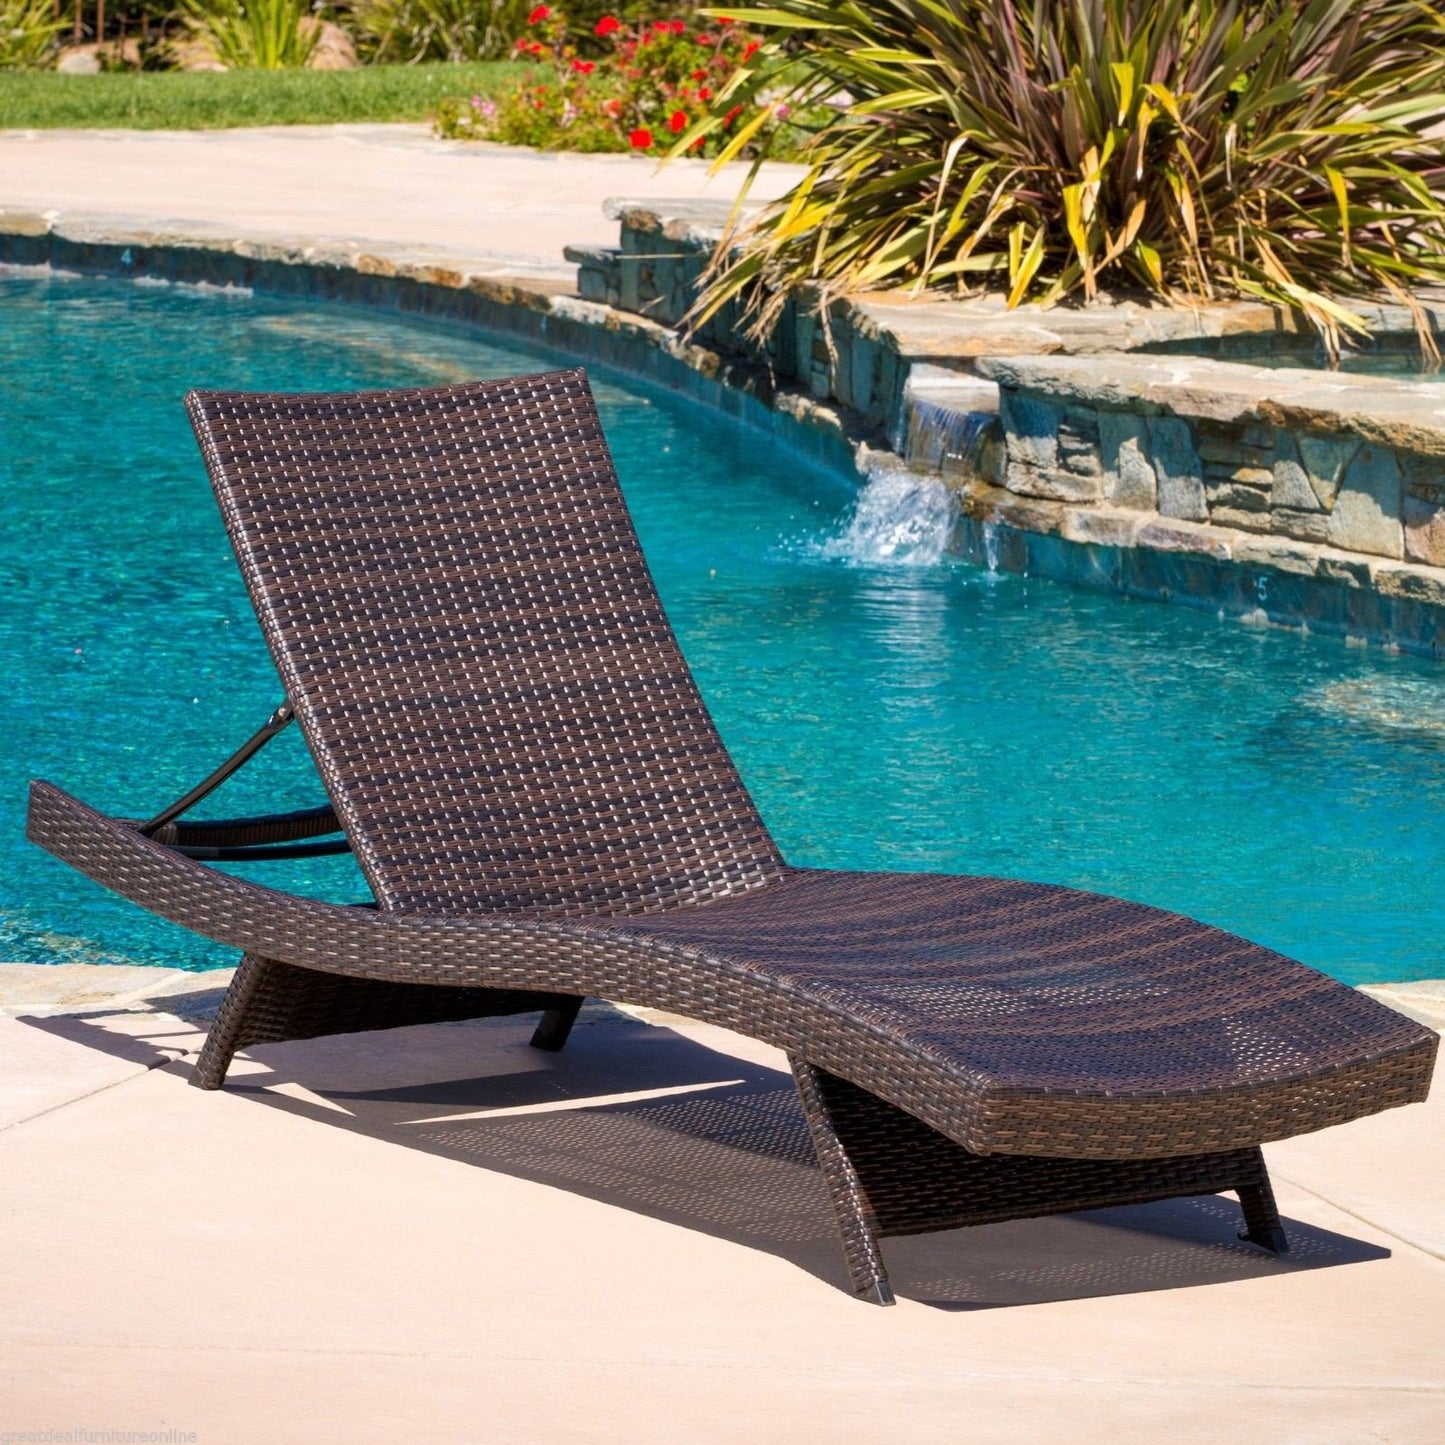 Lakeport Outdoor Adjustable Chaise Lounge Chairs (Set of 4)